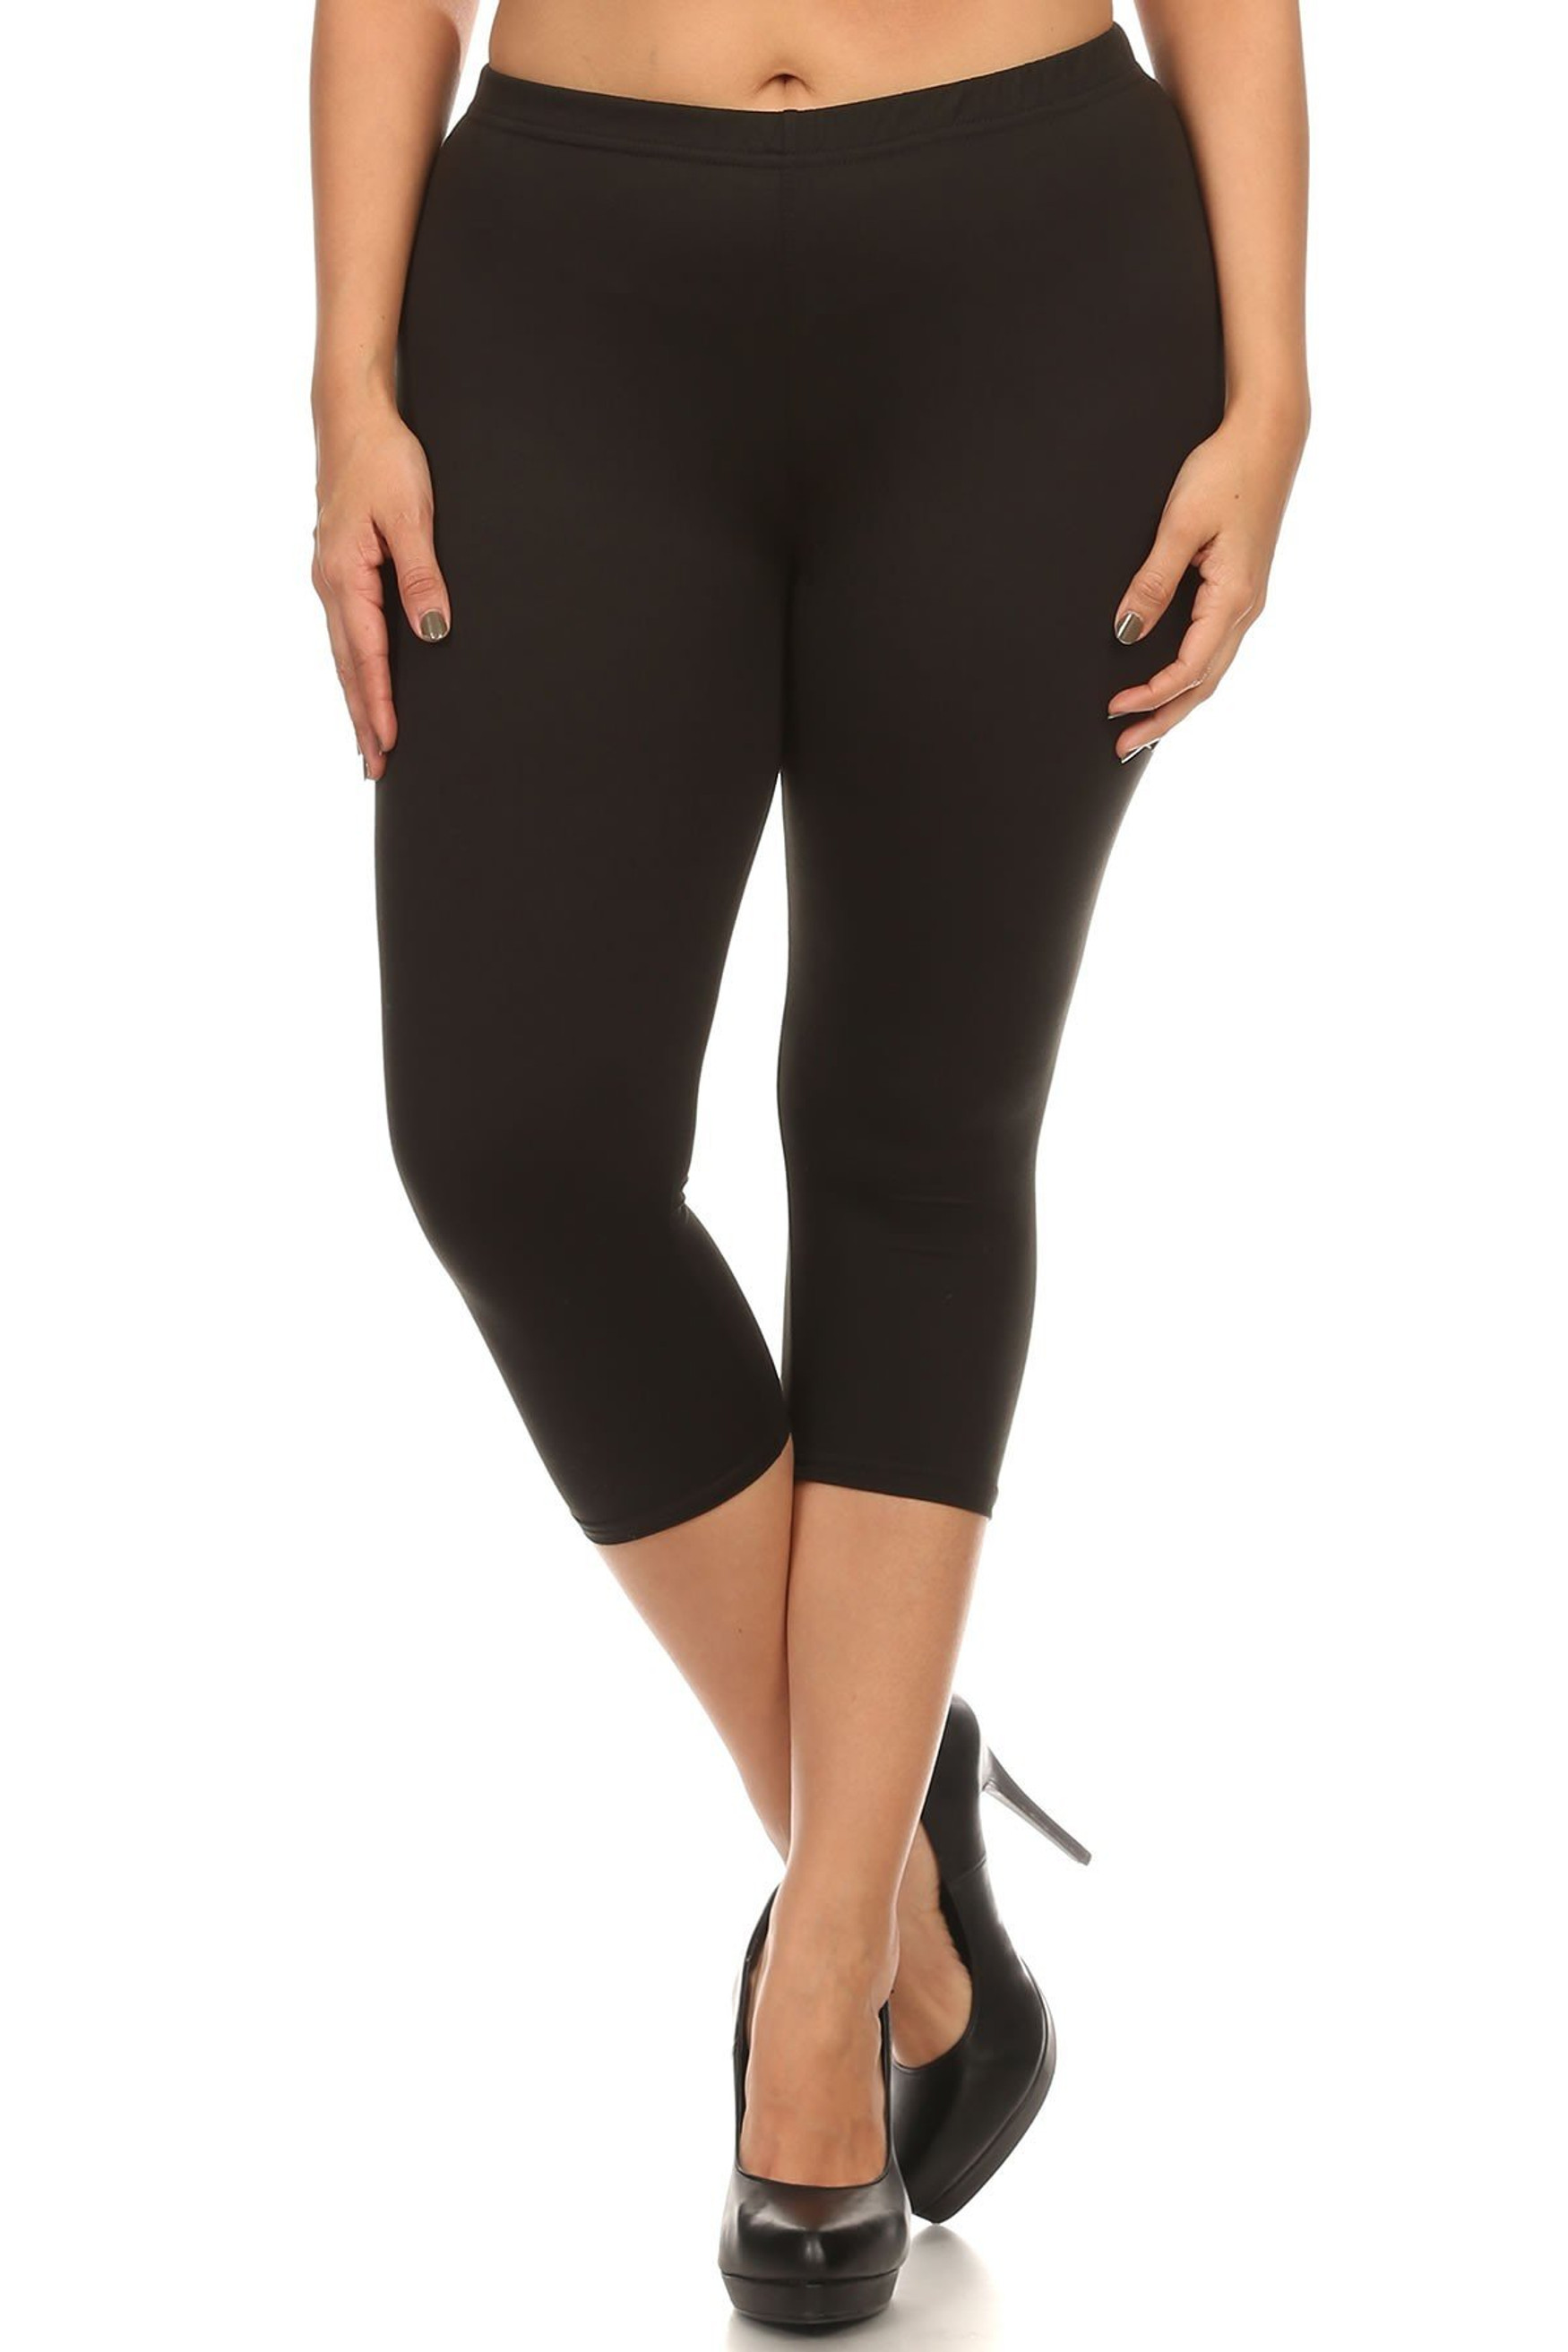 Front side image of Black Buttery Smooth Solid Basic Extra Plus Size Capris - 3X-5X - New Mix